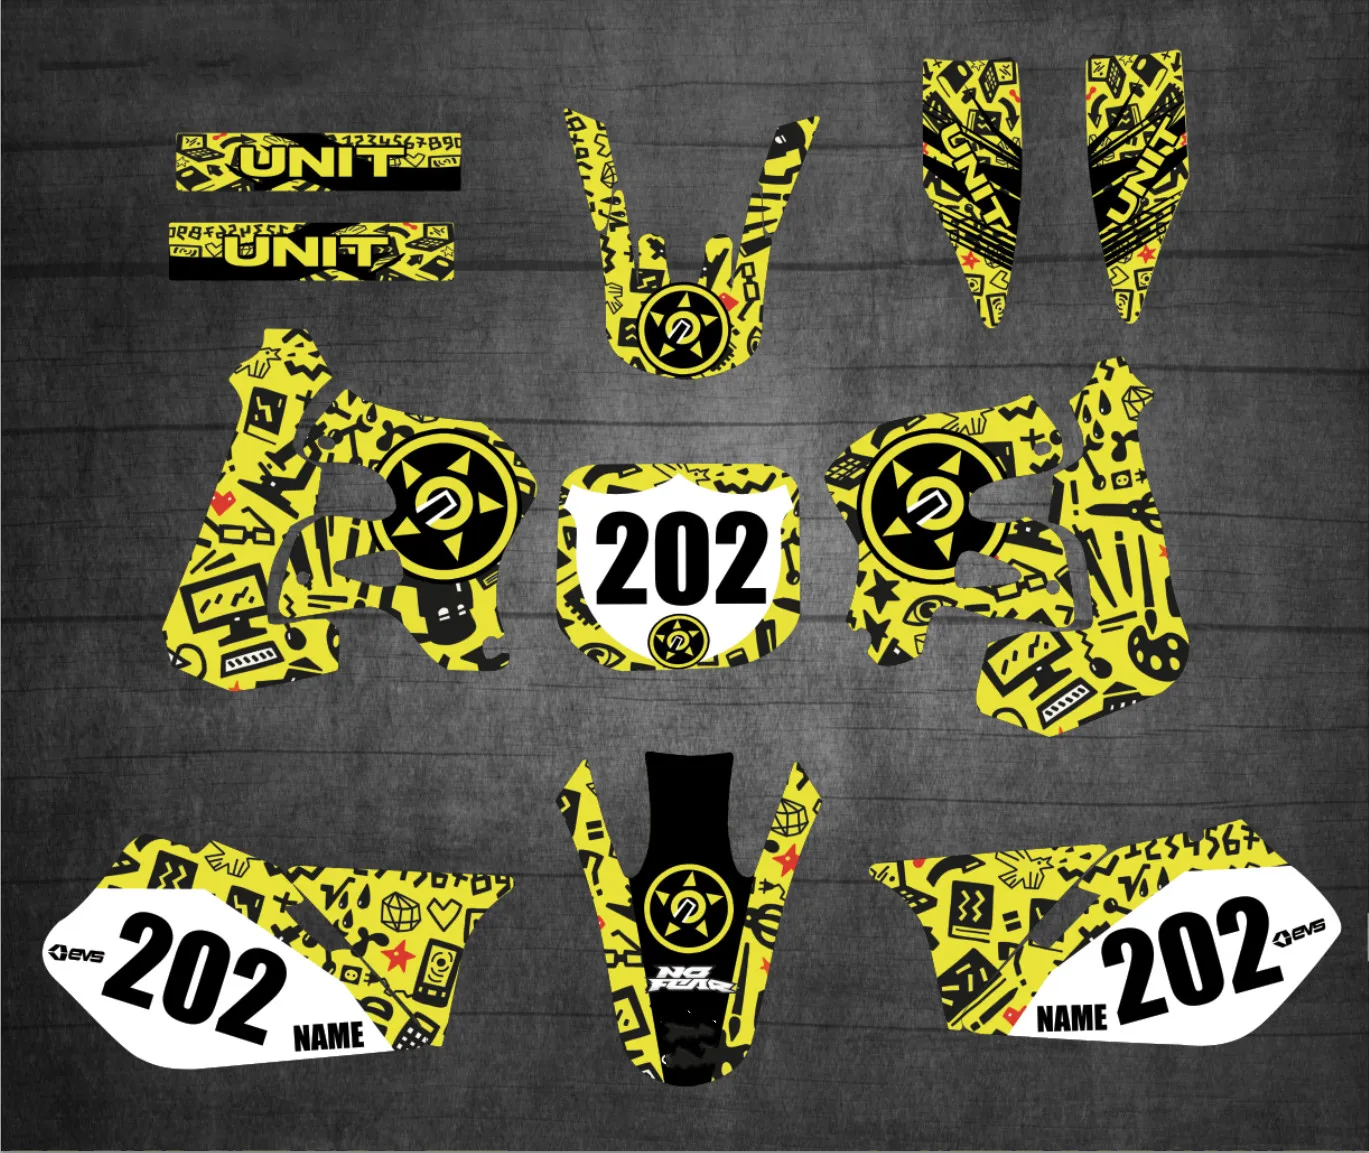 Kungfu Graphics Full Sticker Decal Kit for Suzuki RM125 RM 125 250 2001 to 2012 